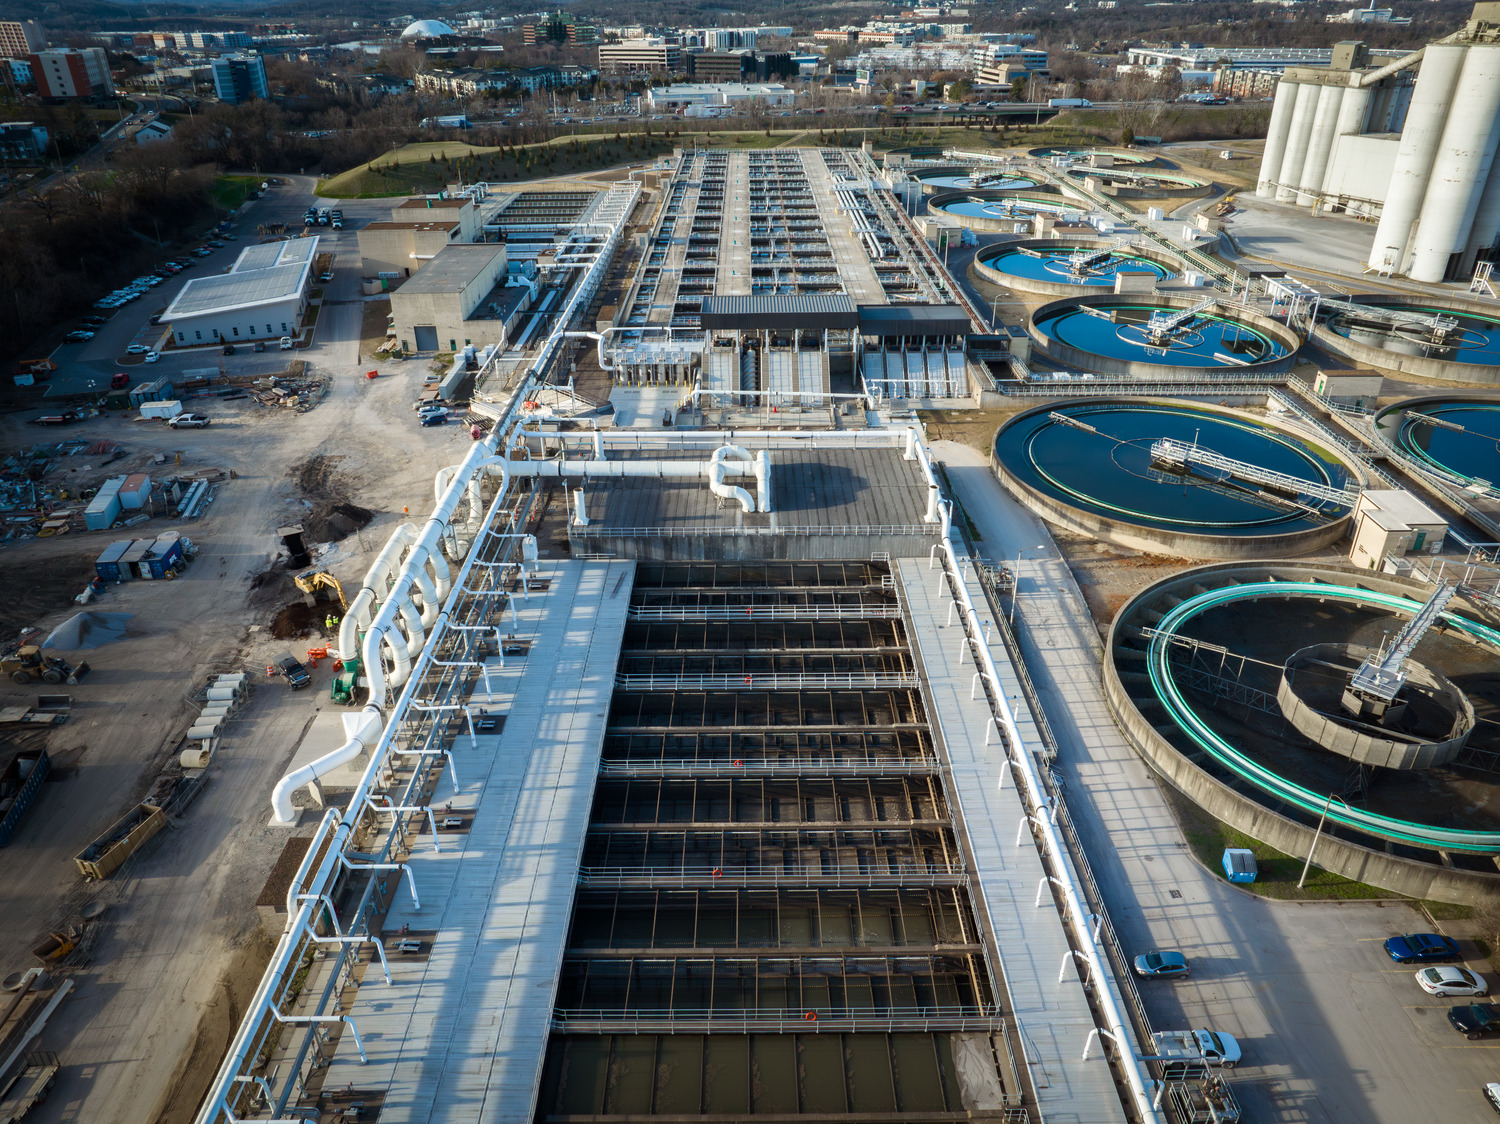 Clarifiers and aeration basins at Central Water Reclamation Facility in Nashville. 